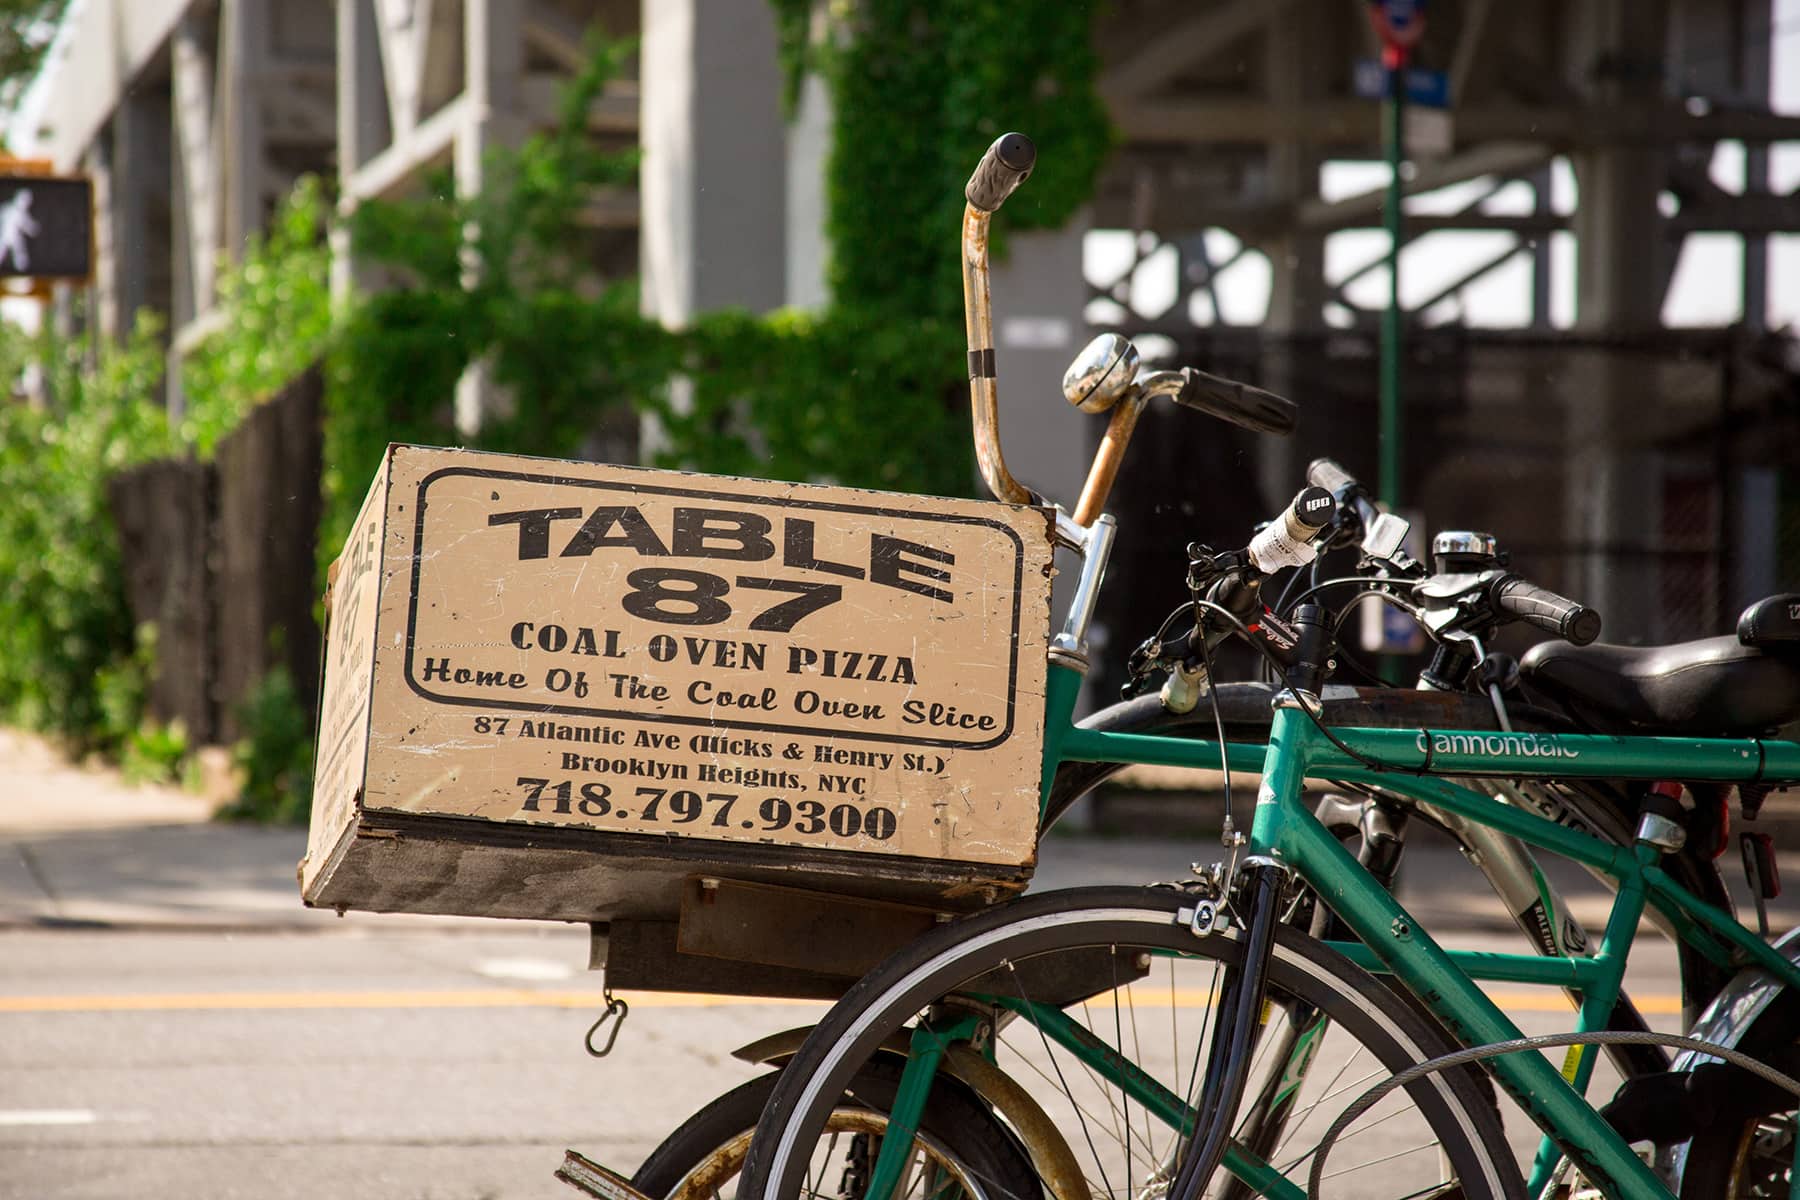 Table 87 Coal Oven Pizza Delivery Bike